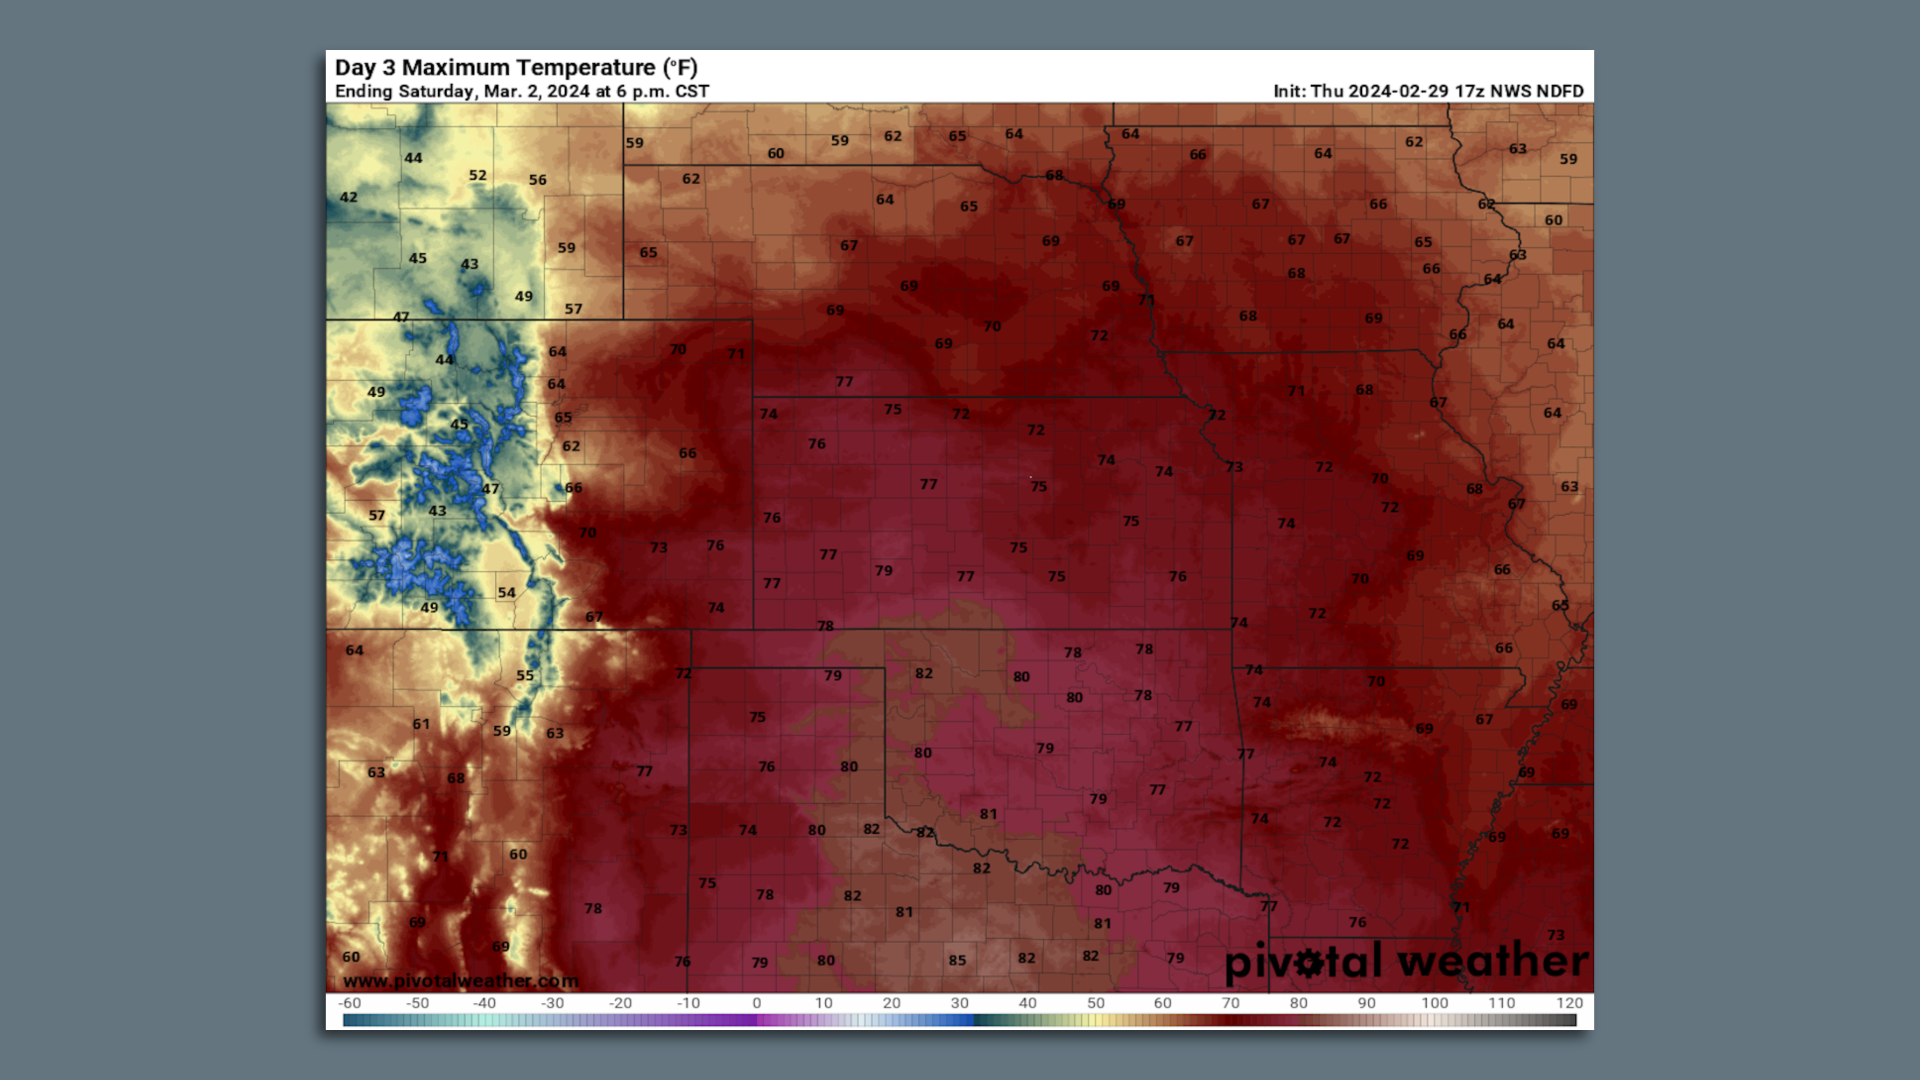 Forecast high temperatures across the Plains, including the Texas Panhandle, on Saturday. 